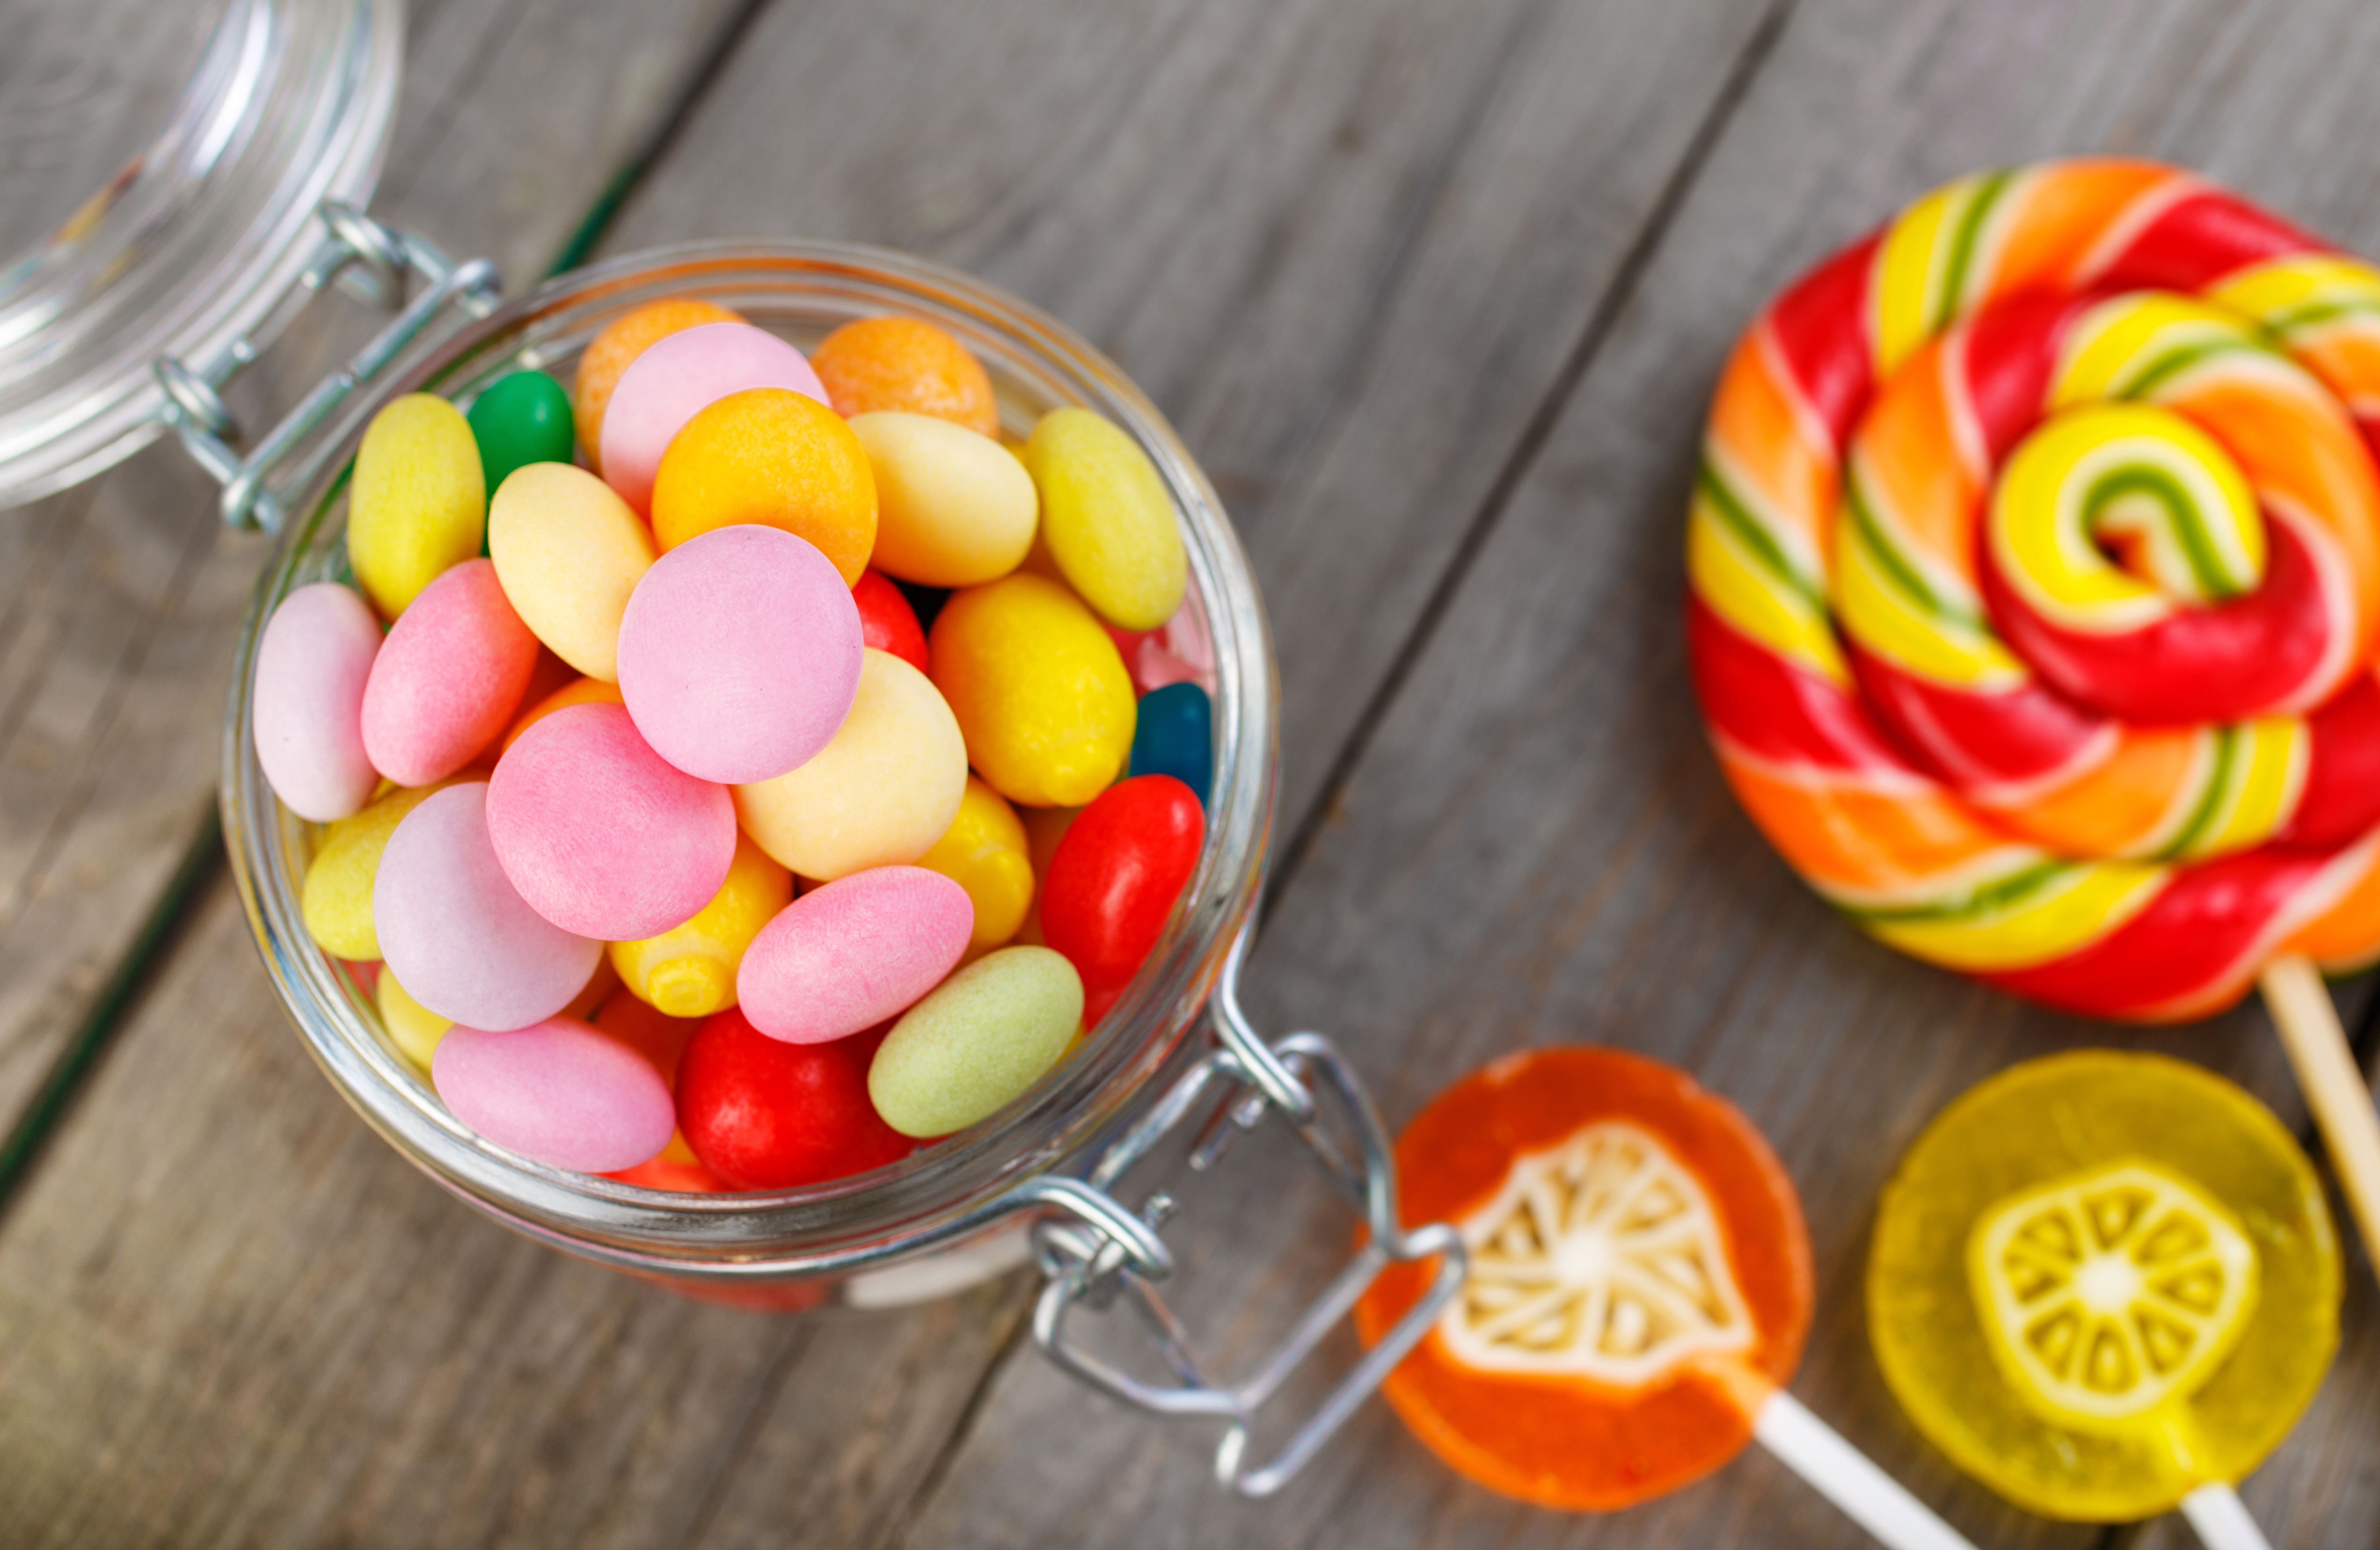 Candy Colorful Lollipop Sweets 5086x3313